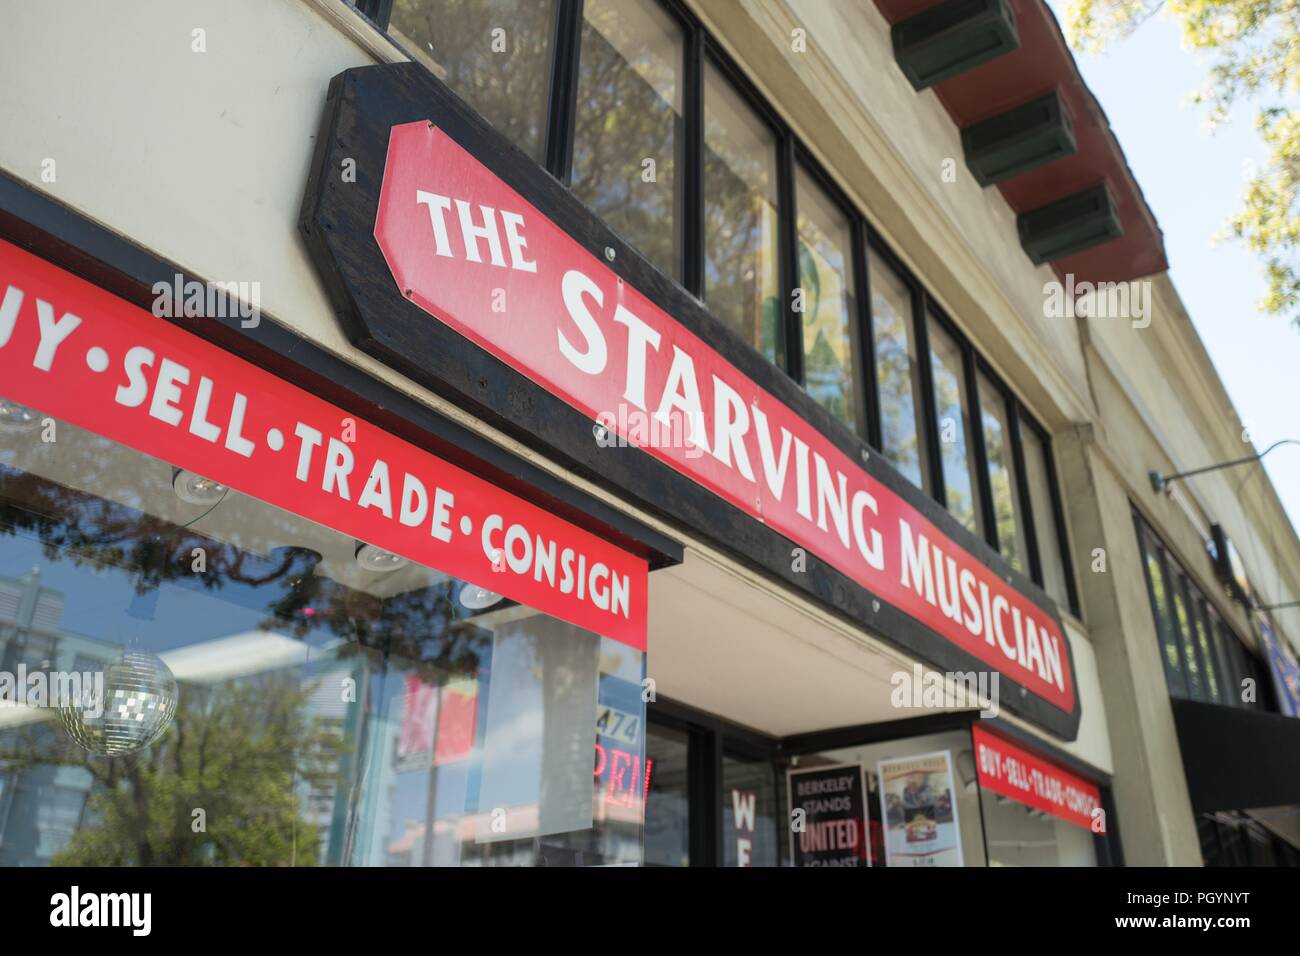 Sign on facade of the Starving Musician, an independent store for used musical equipment in downtown Berkeley, California, May 17, 2018. () Stock Photo